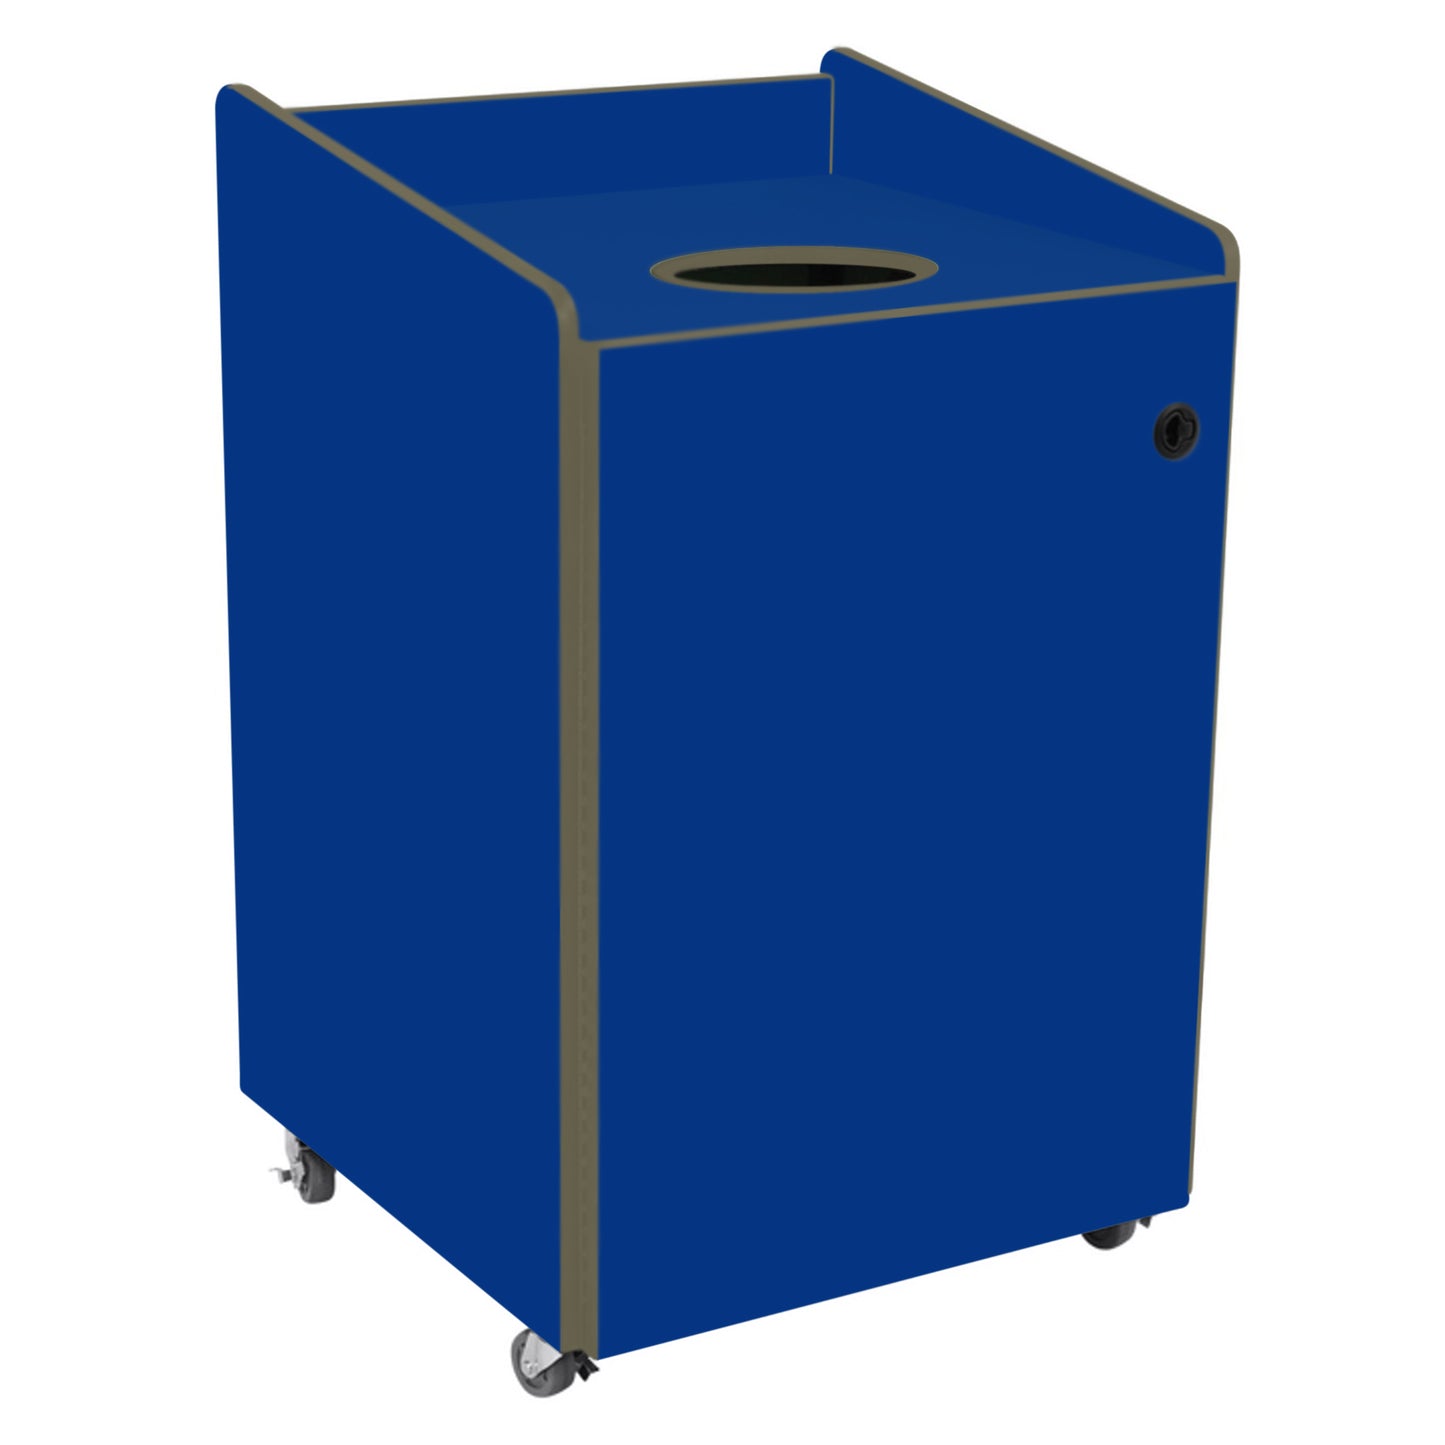 AmTab Heavy-Duty Recycling Receptacle - Applicable for 55 Gallon Cans and Drums - 33"W x 32"L x 50"H  (AMT-HDRR55)